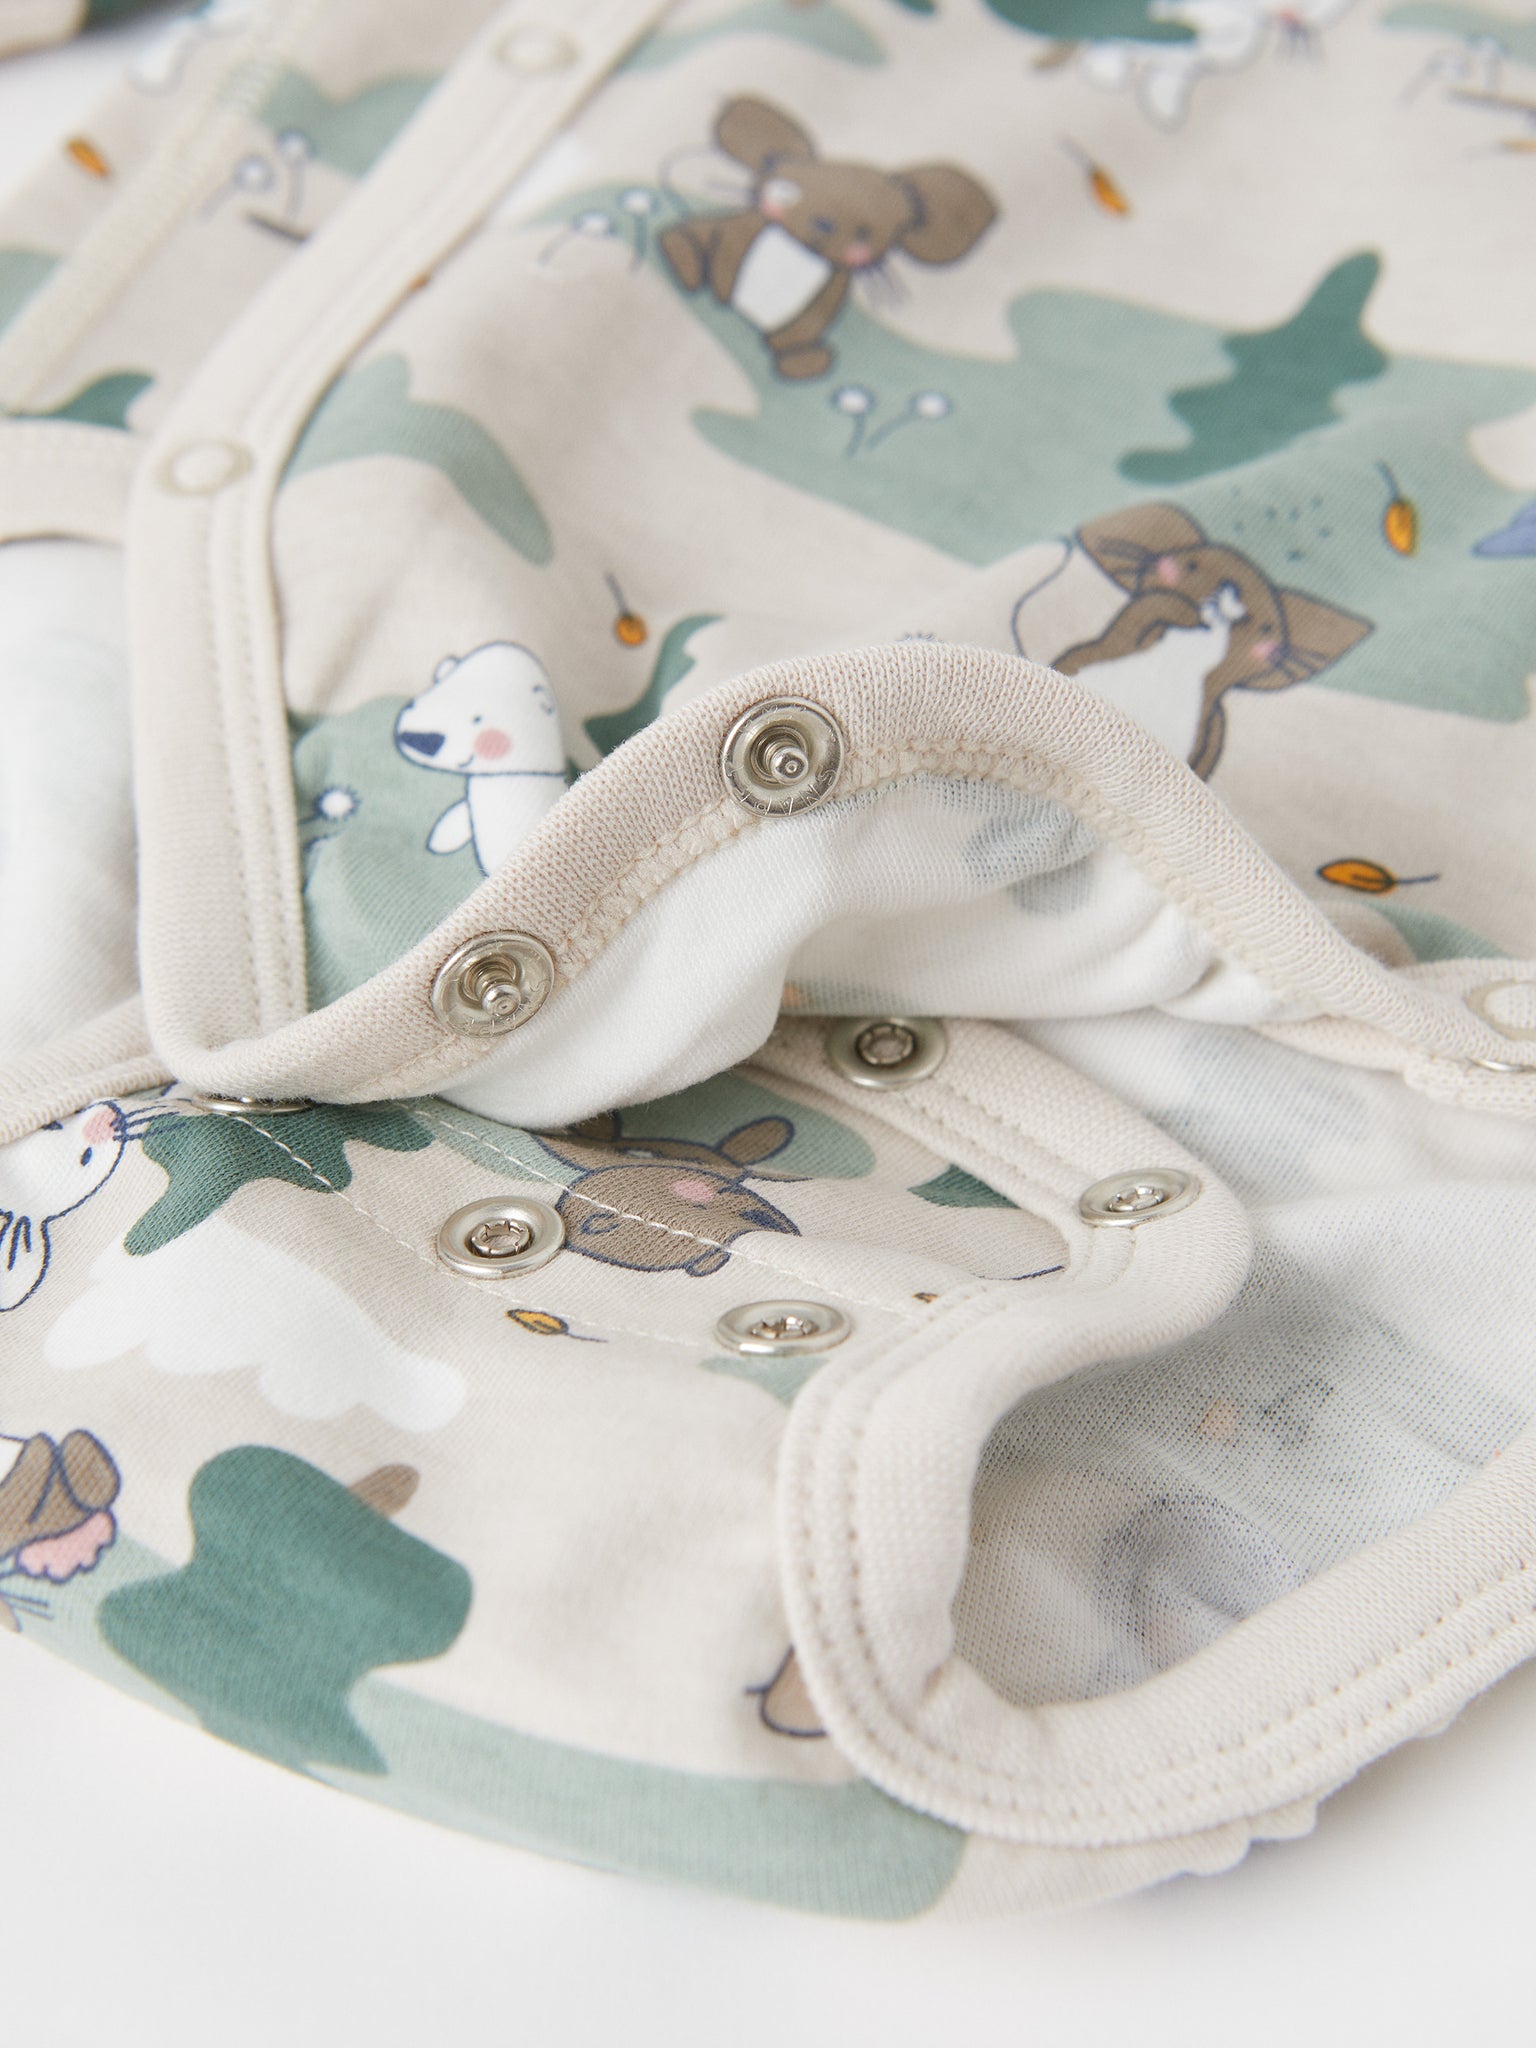 Organic Cotton Wraparound Babygrow from the Polarn O. Pyret baby collection. Ethically produced baby clothing.